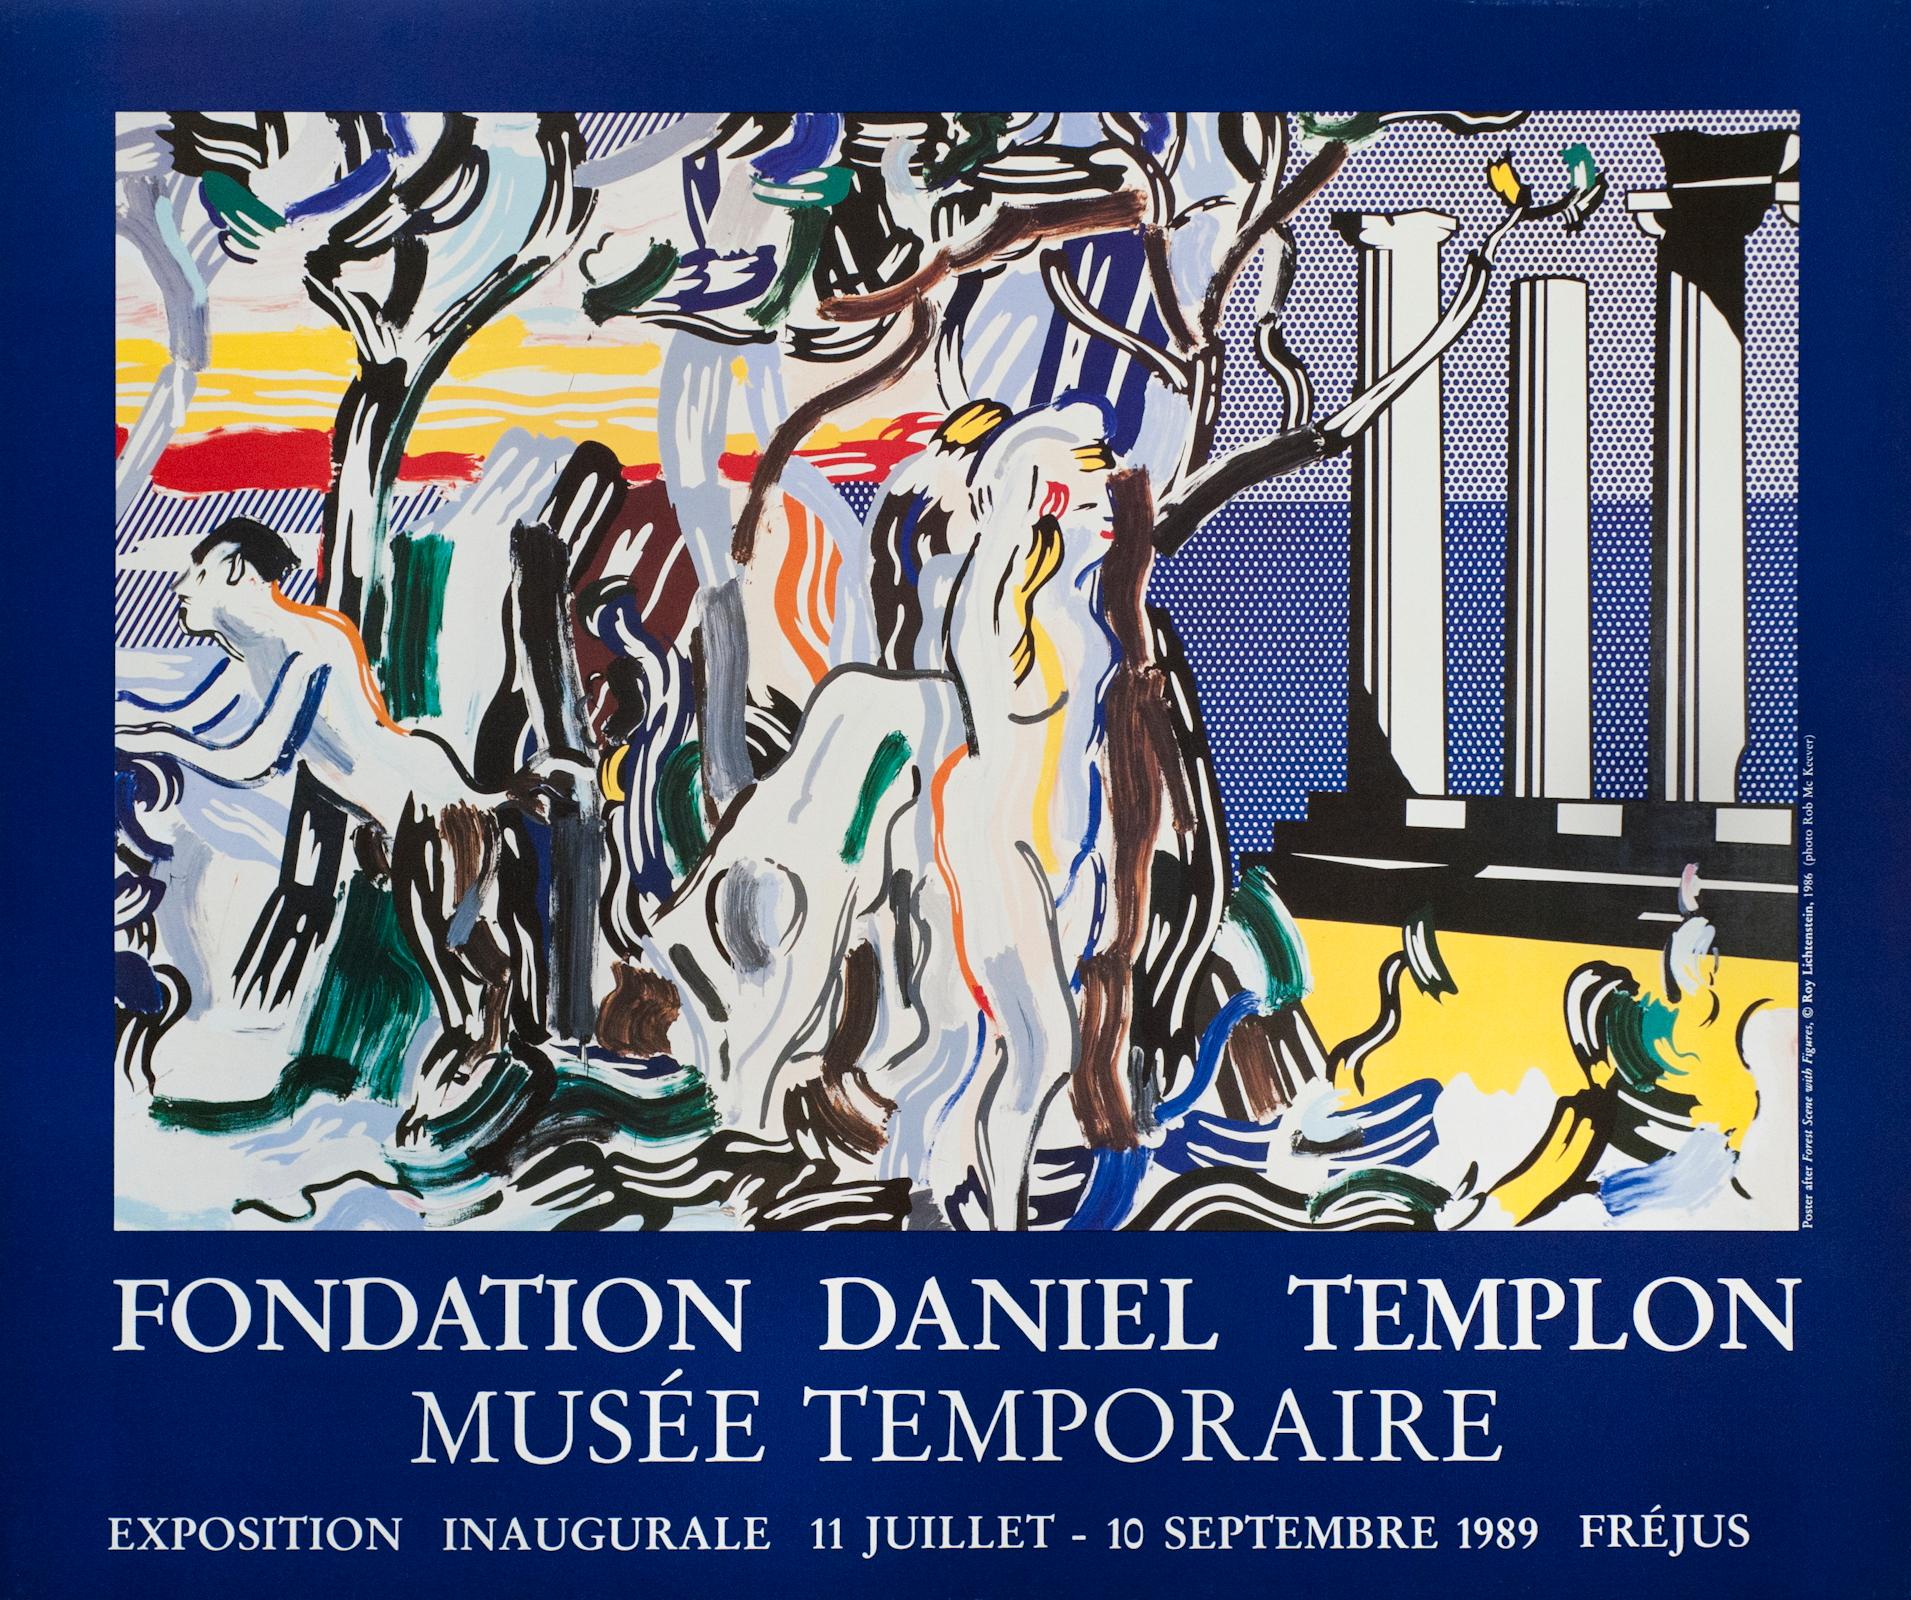 The image of “Forest Scene with Figurines, 1989” by Roy Lichtenstein was used to create this exhibition poster. It was published by the Fondation Daniel Templon commemorating the inauguration of the Musee Temporaire in Frejus, France in 1989.
